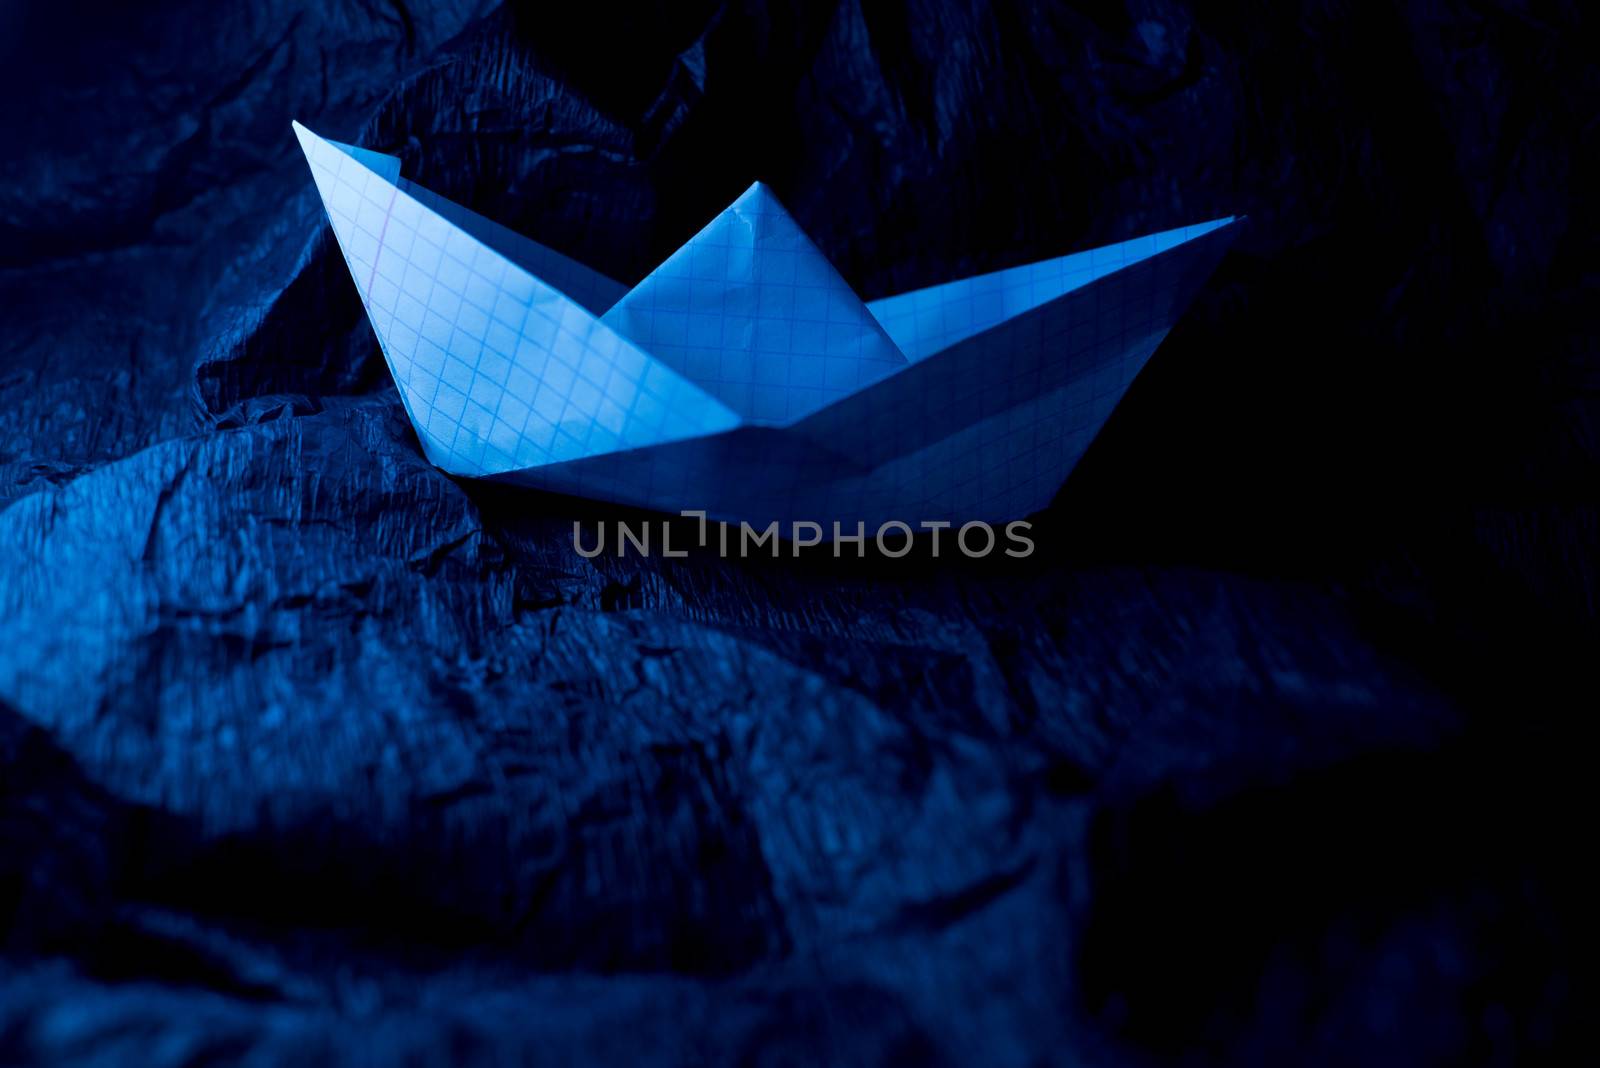 Paper boat on colored backgrounds